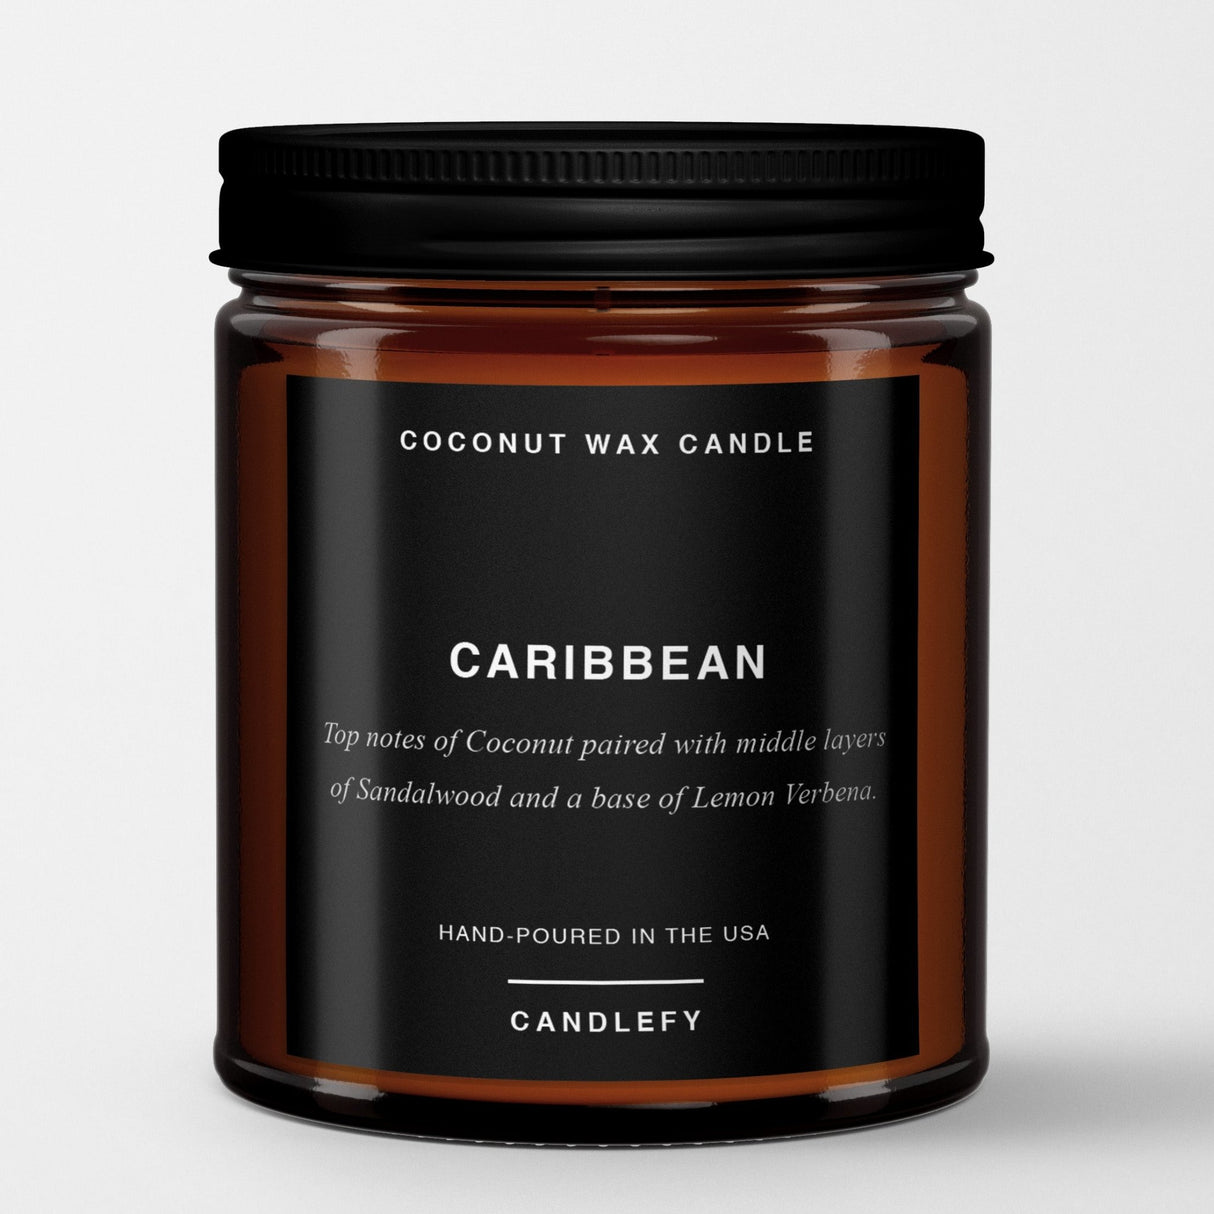 Caribbean: Scented Candle in Amber Glass, Made with Natural Coconut Wax - Candlefy